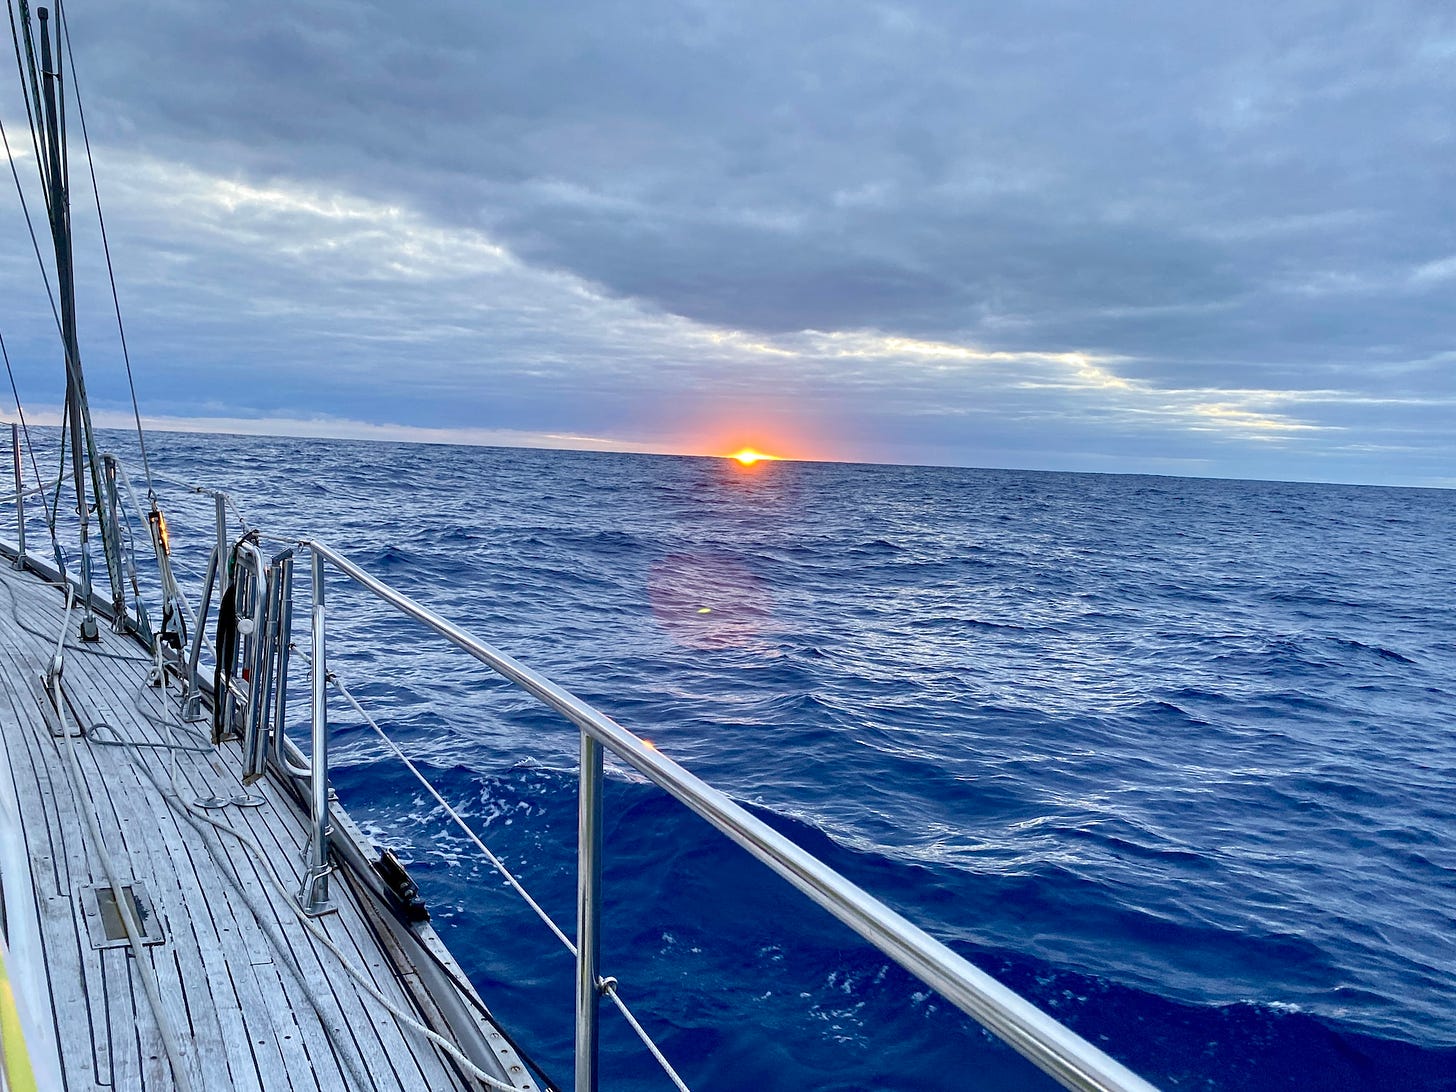 A view of the sunrise on the ocean. The deck and rails of a sailboat are in the foreground, the sun is brilliant orange at the horizon.